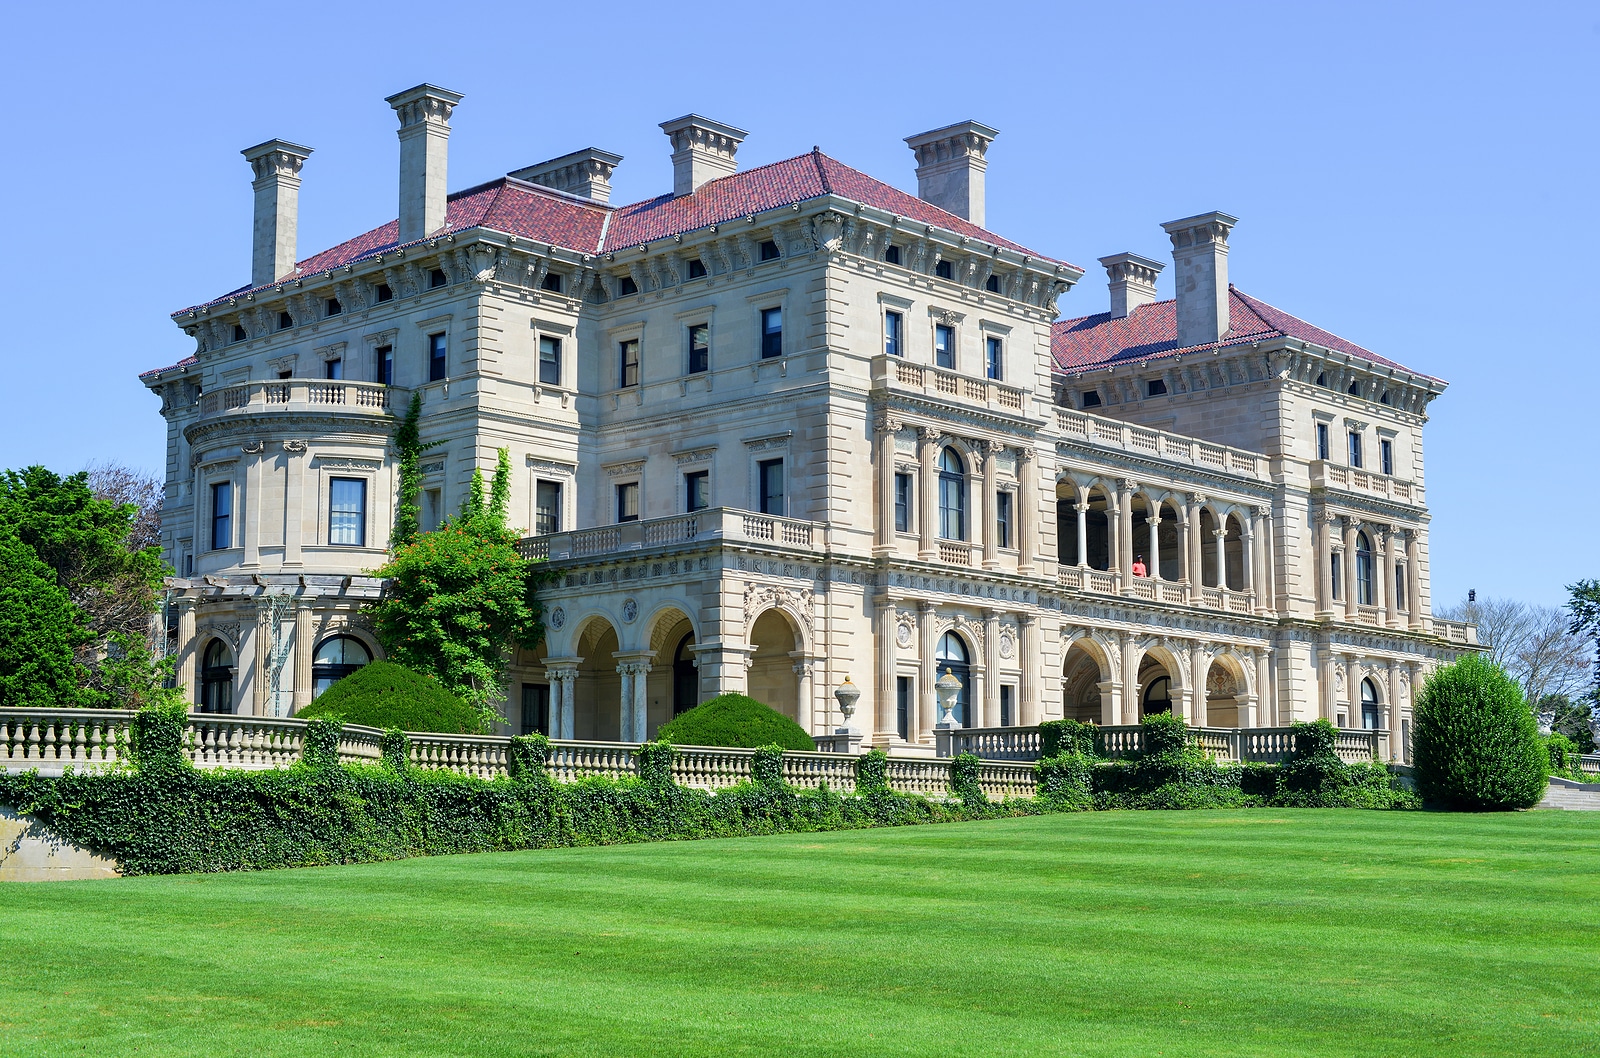 tours of mansions in newport rhode island